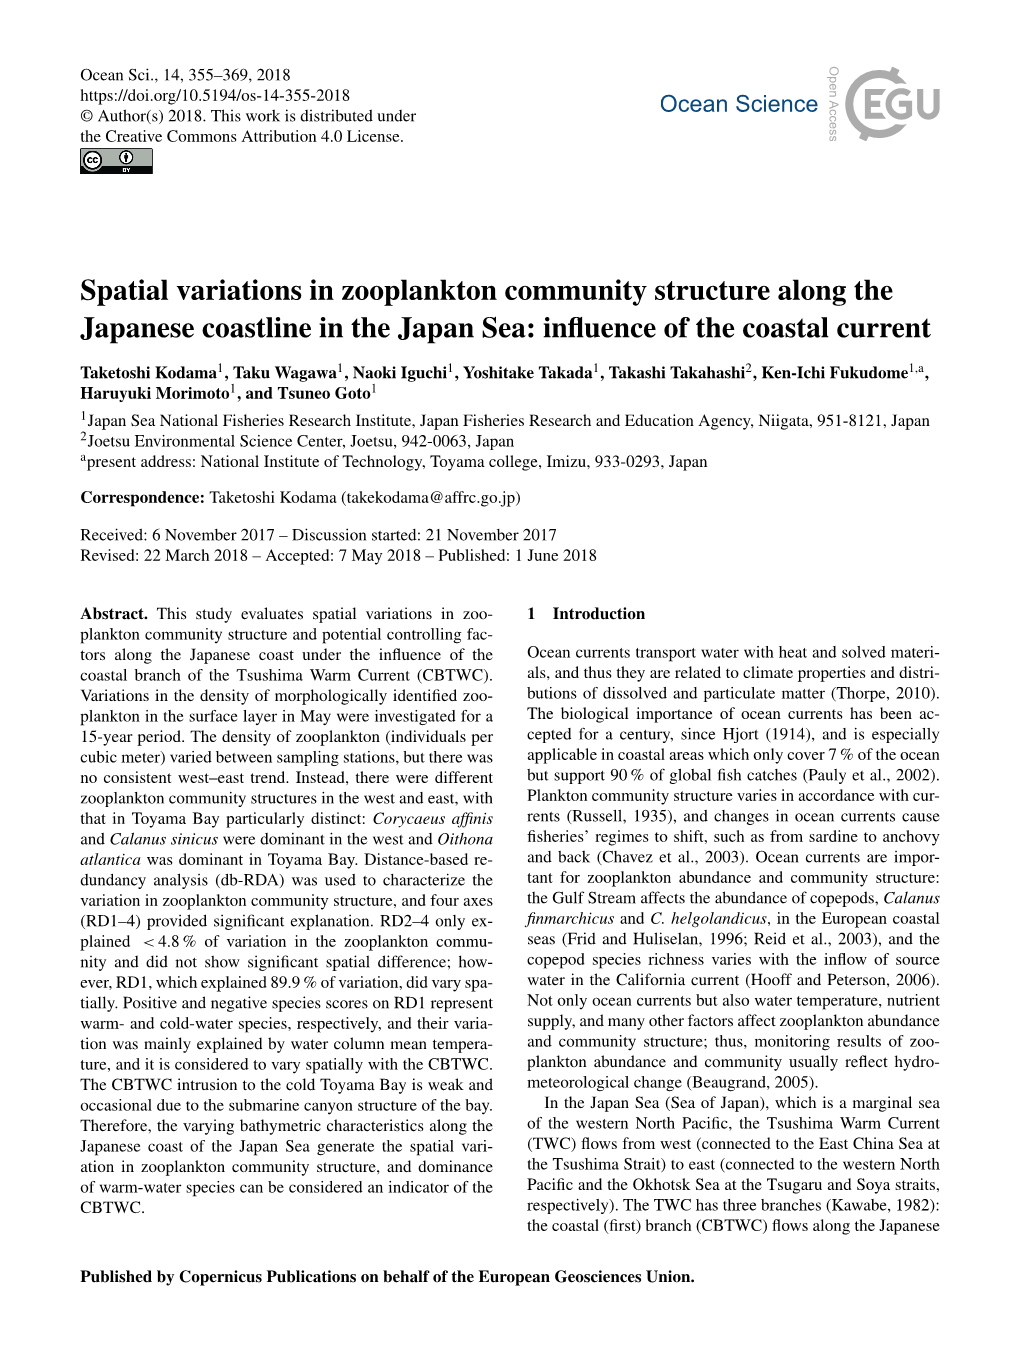 Spatial Variations in Zooplankton Community Structure Along the Japanese Coastline in the Japan Sea: Inﬂuence of the Coastal Current